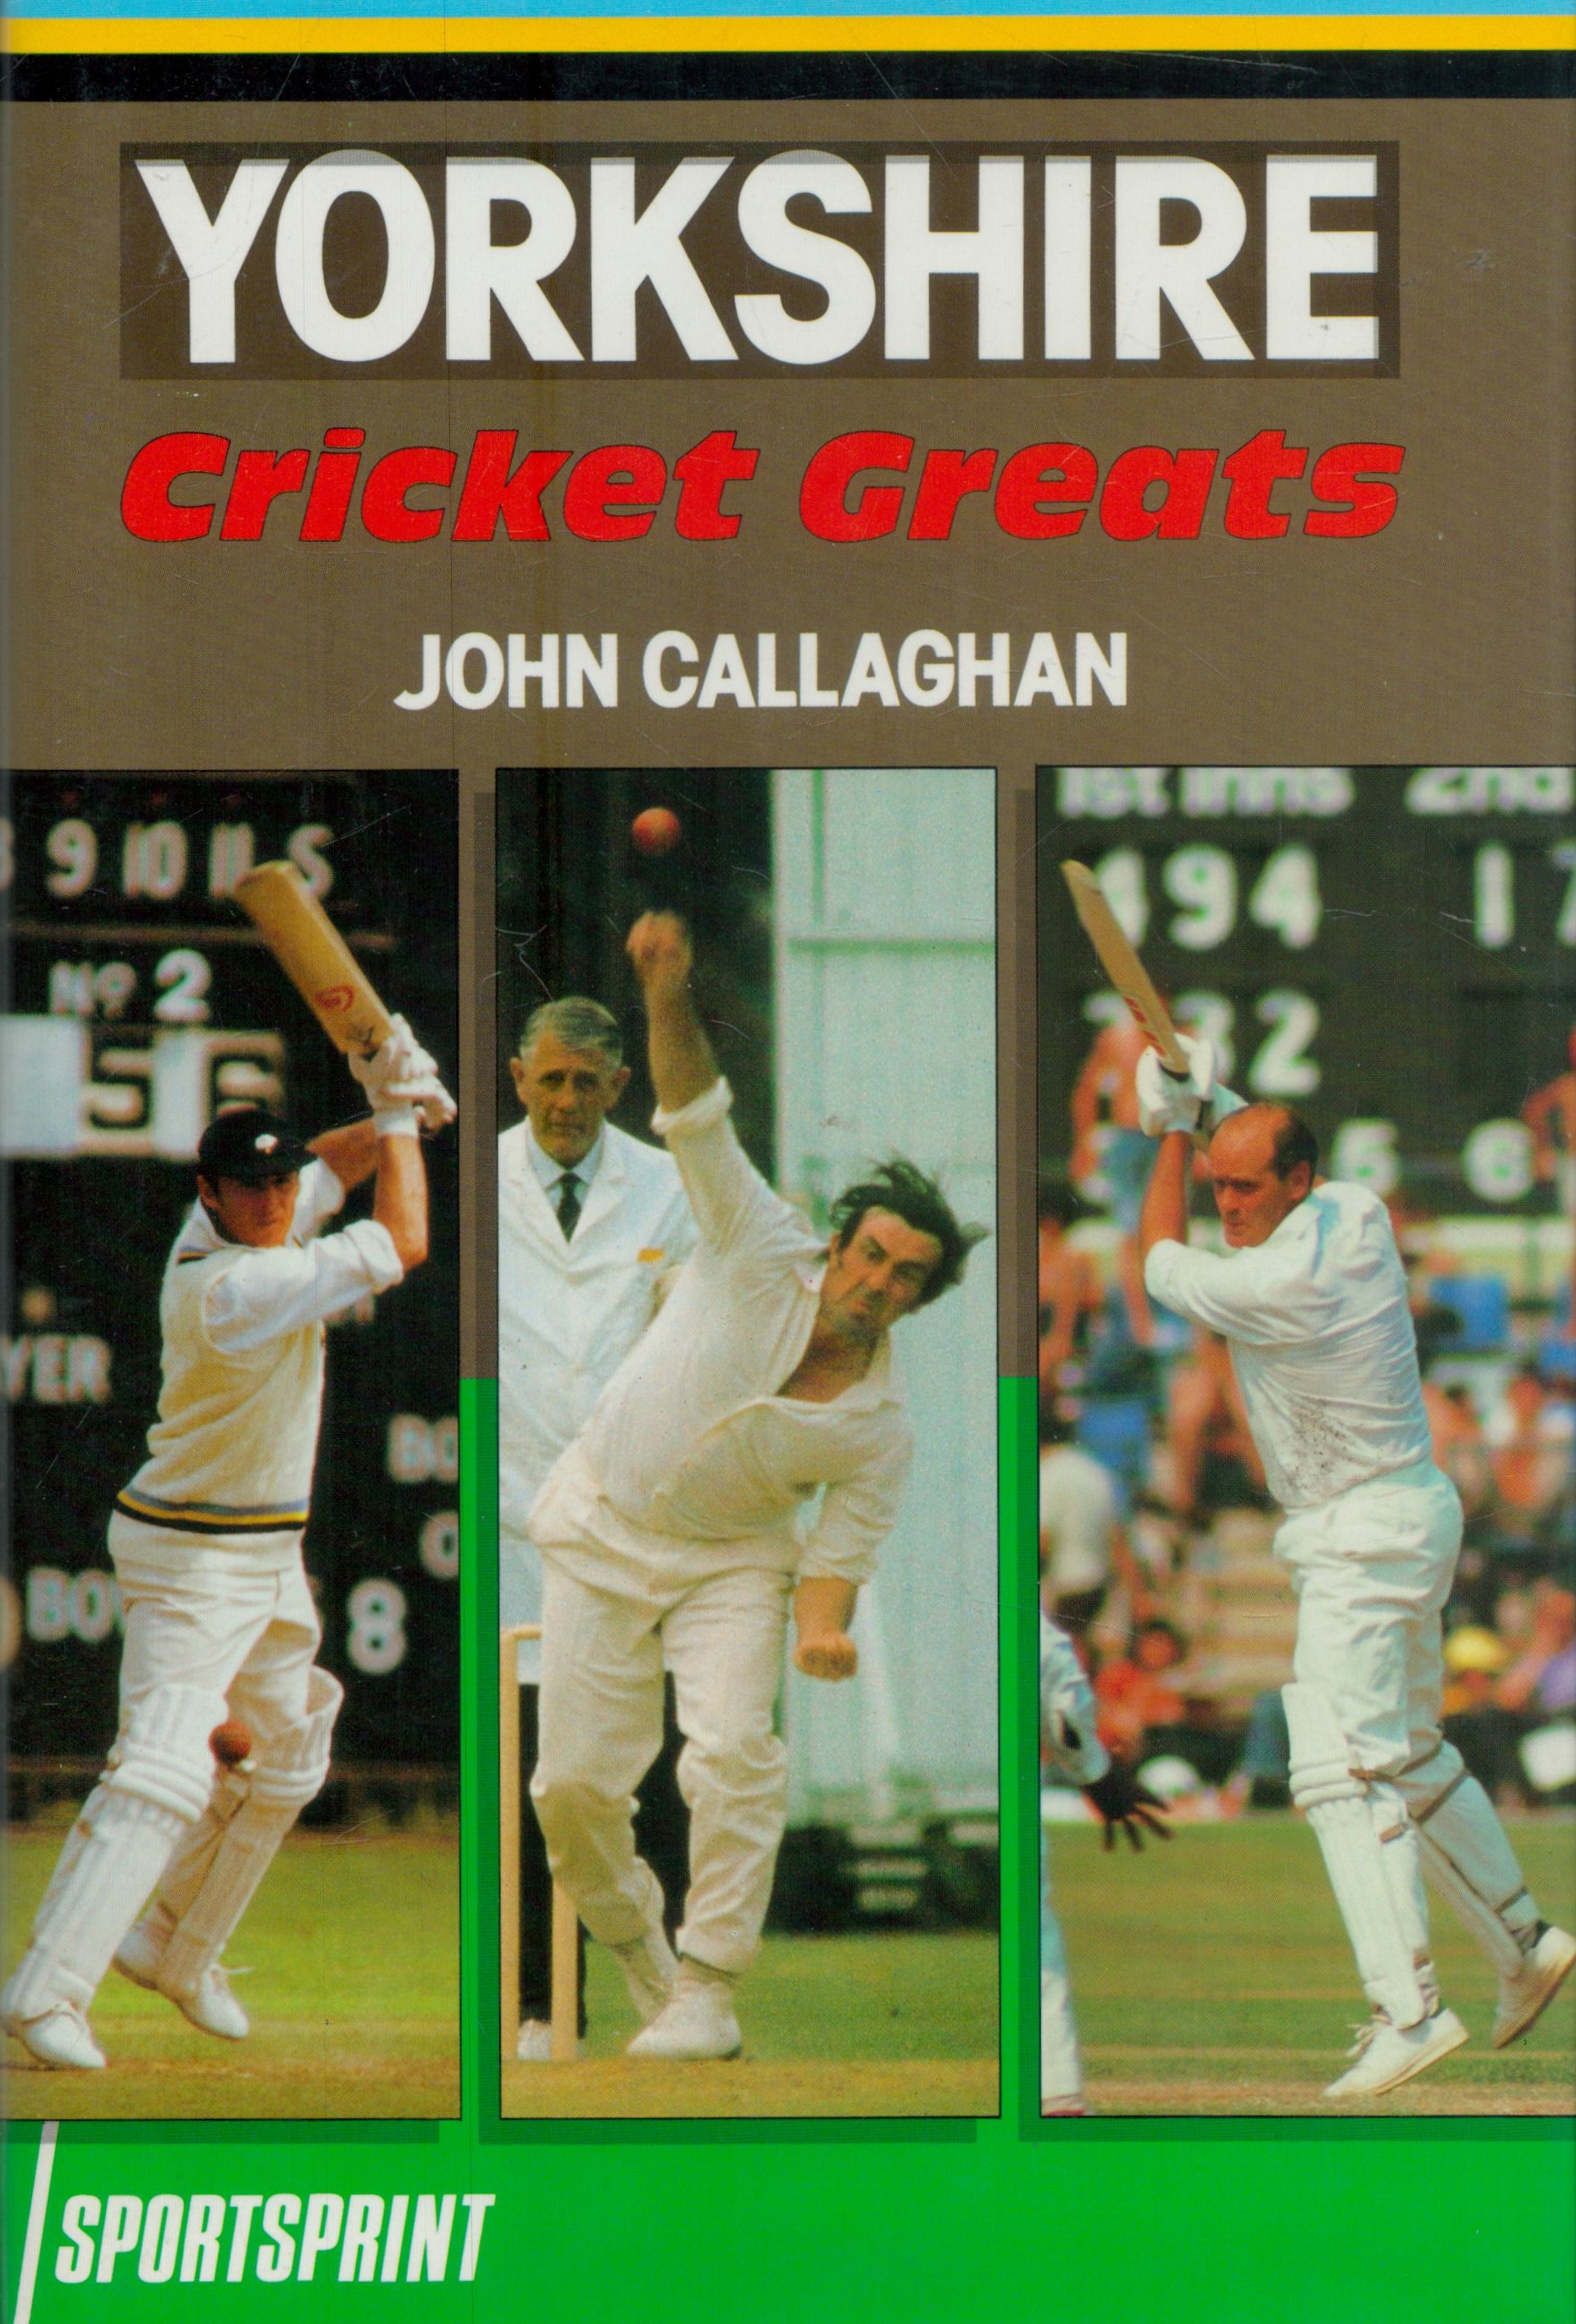 Yorkshire Cricket Greats John Callaghan Hardback book, 163 pages. Good Condition. All autographs